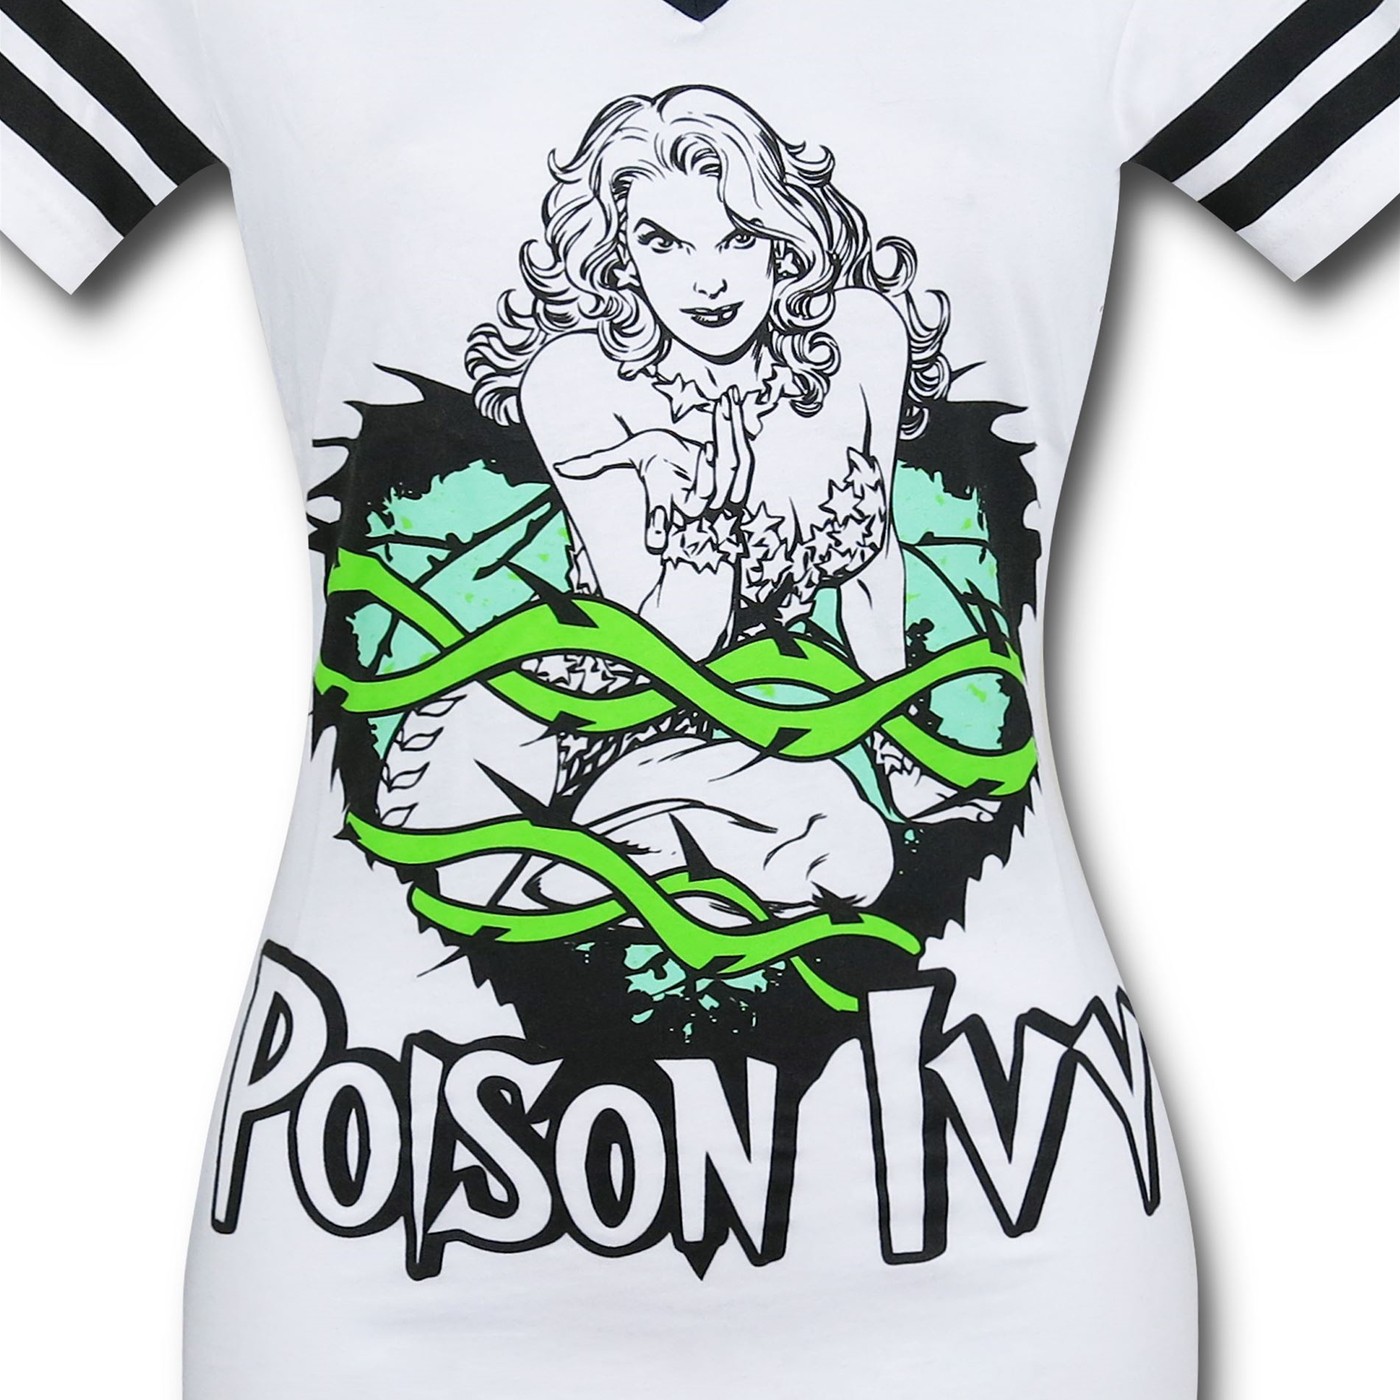 Poison Ivy Athletic Women's T-Shirt